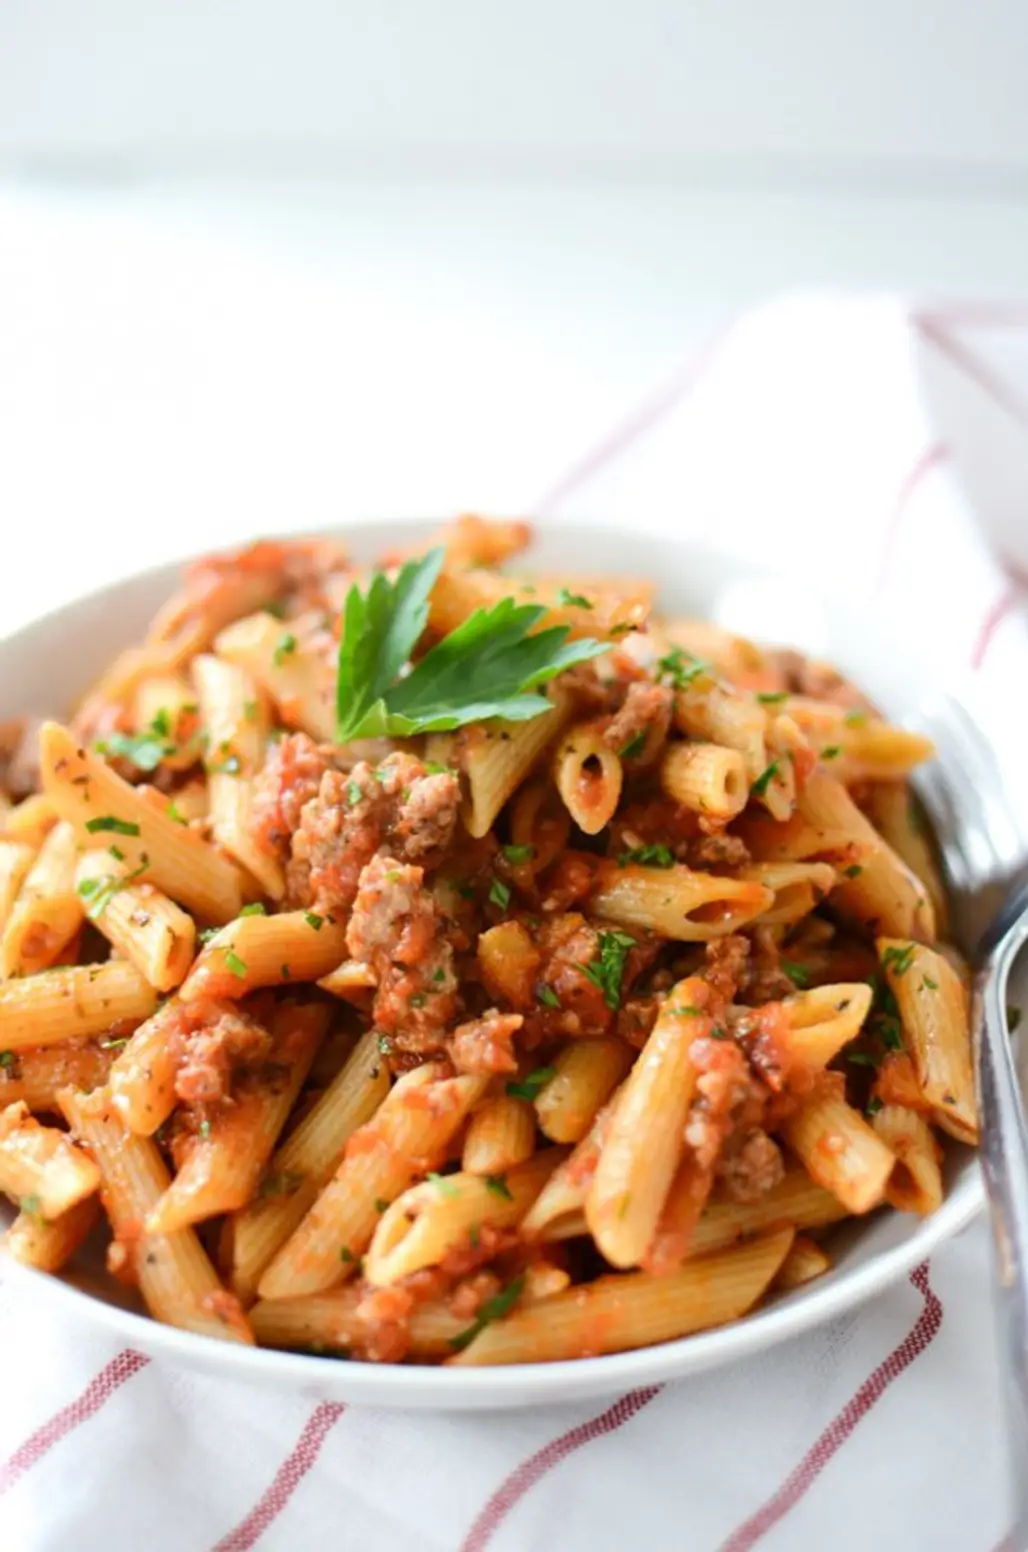 Whole Wheat Pasta with Meat Sauce